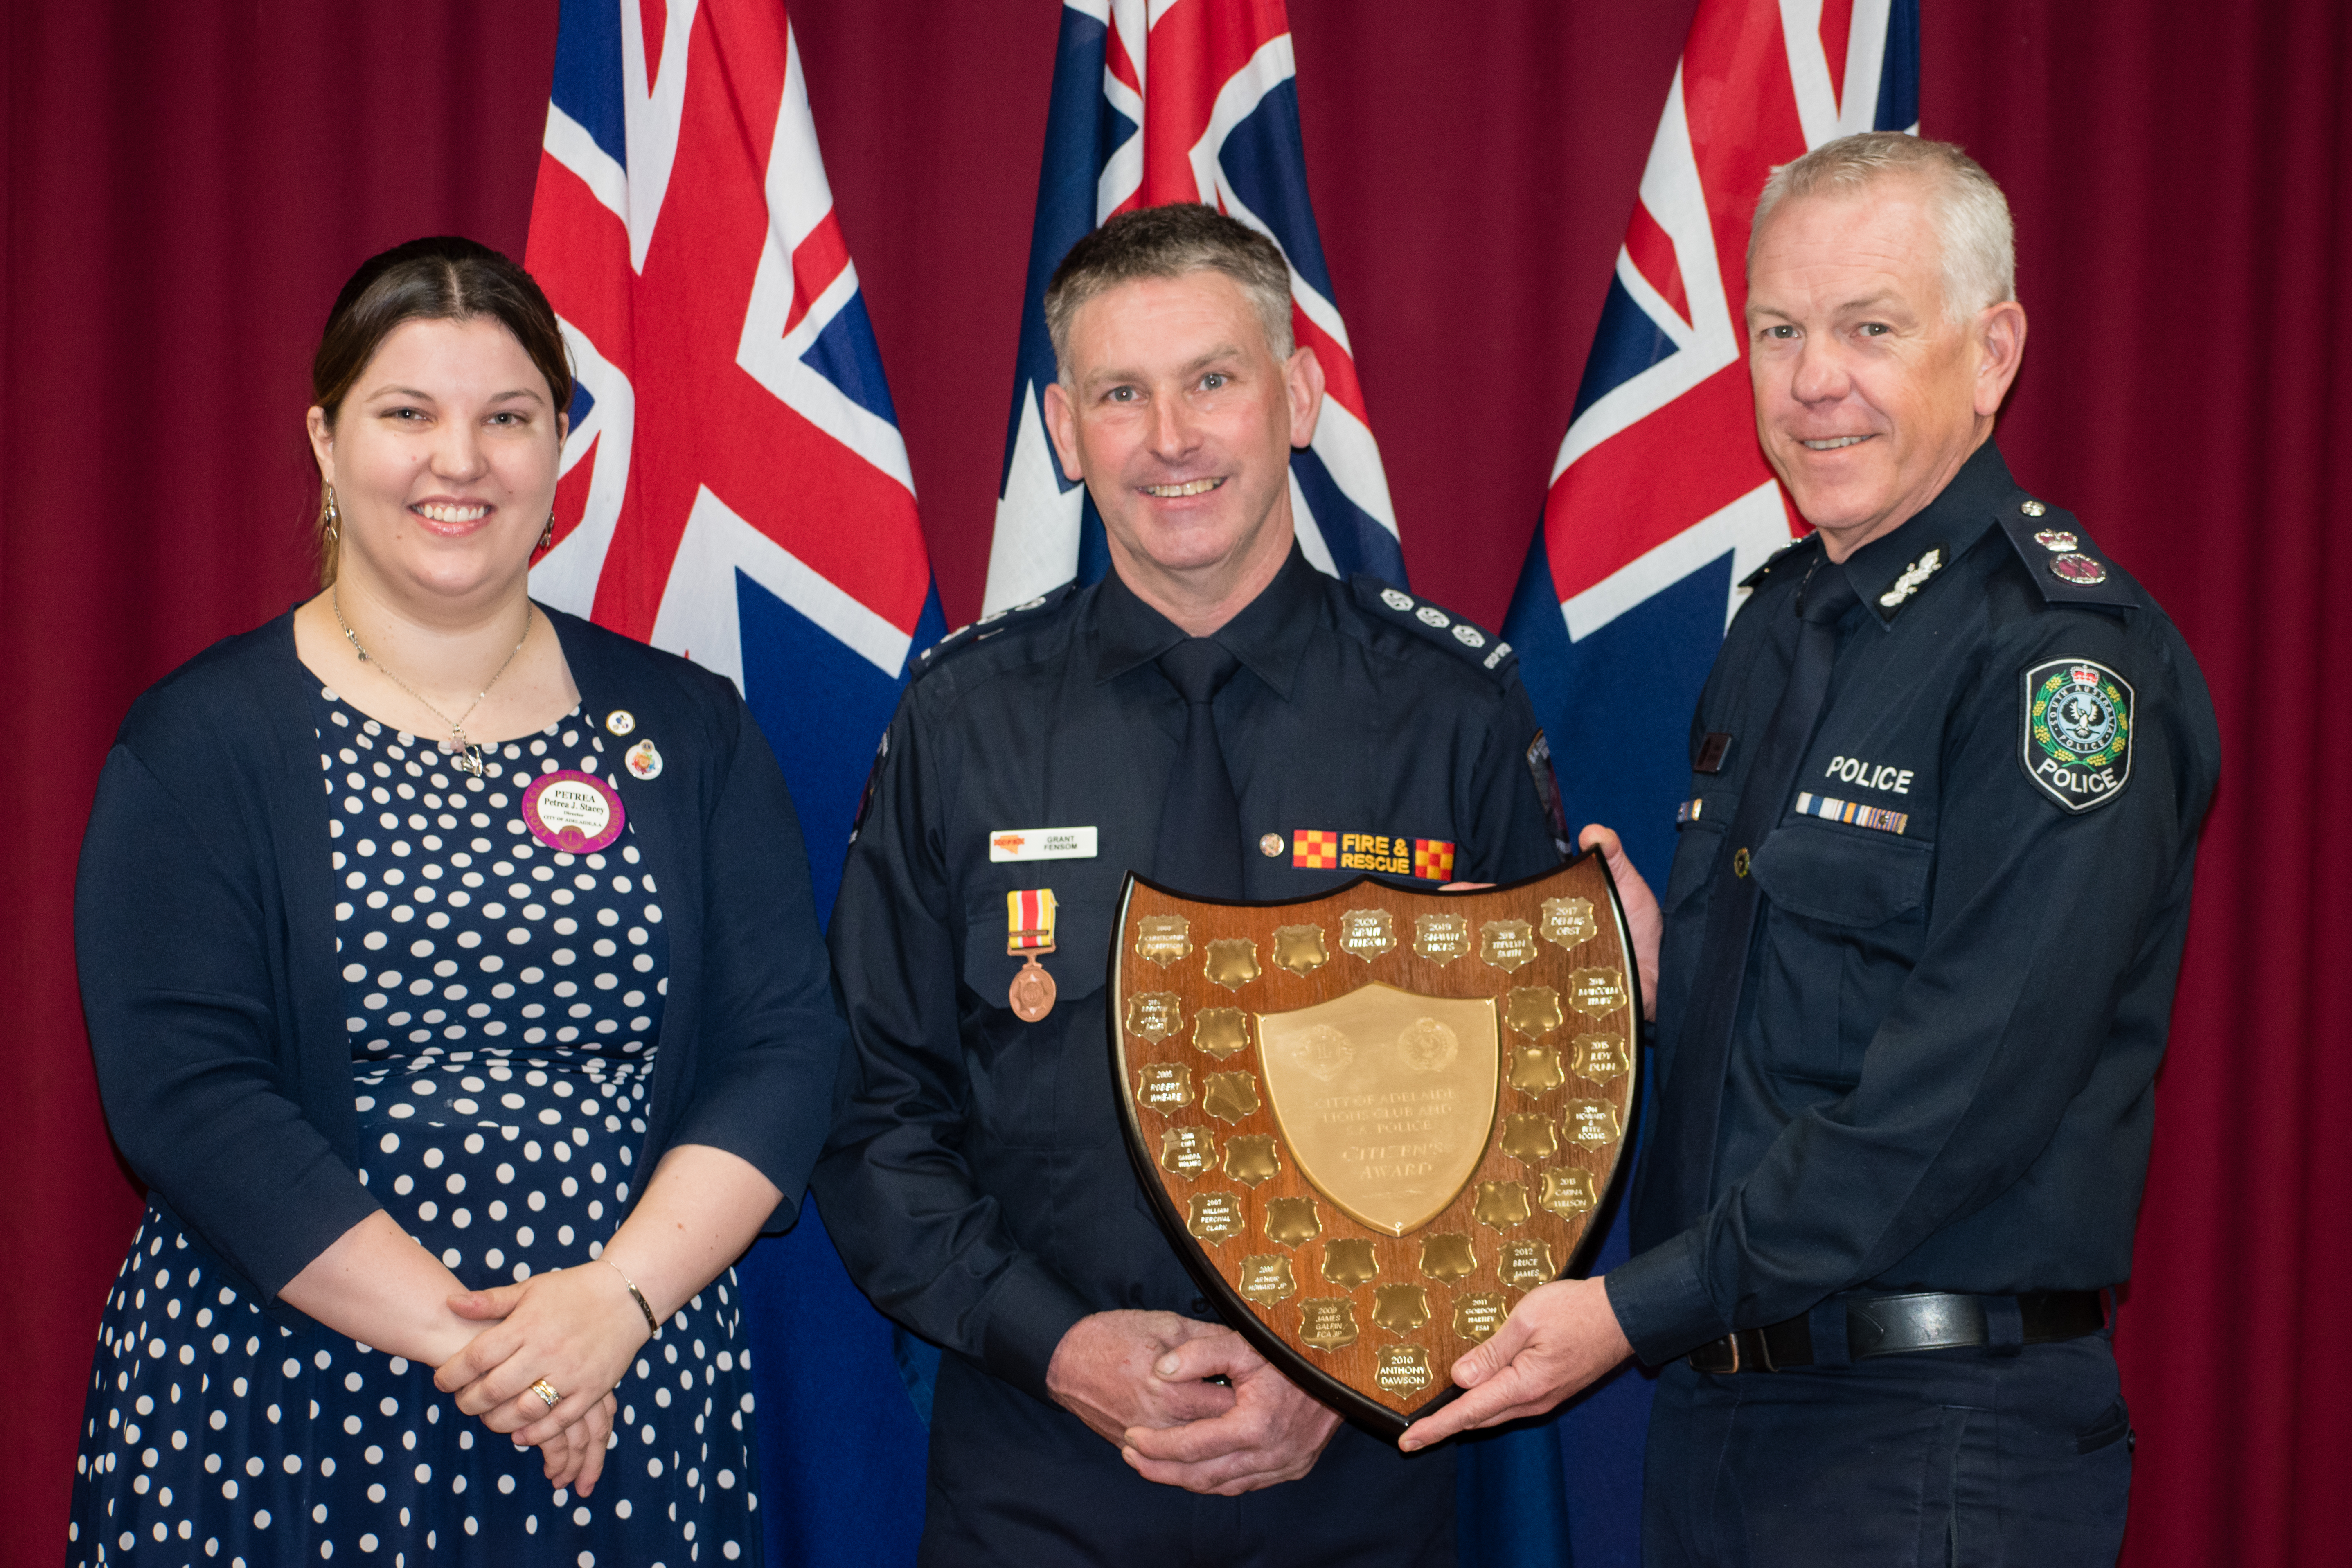 President of The Lions Club of the City of Adelaide, Petrea Stacey, award recipient Grant Fensom and Police Commissioner Grant Stevens.